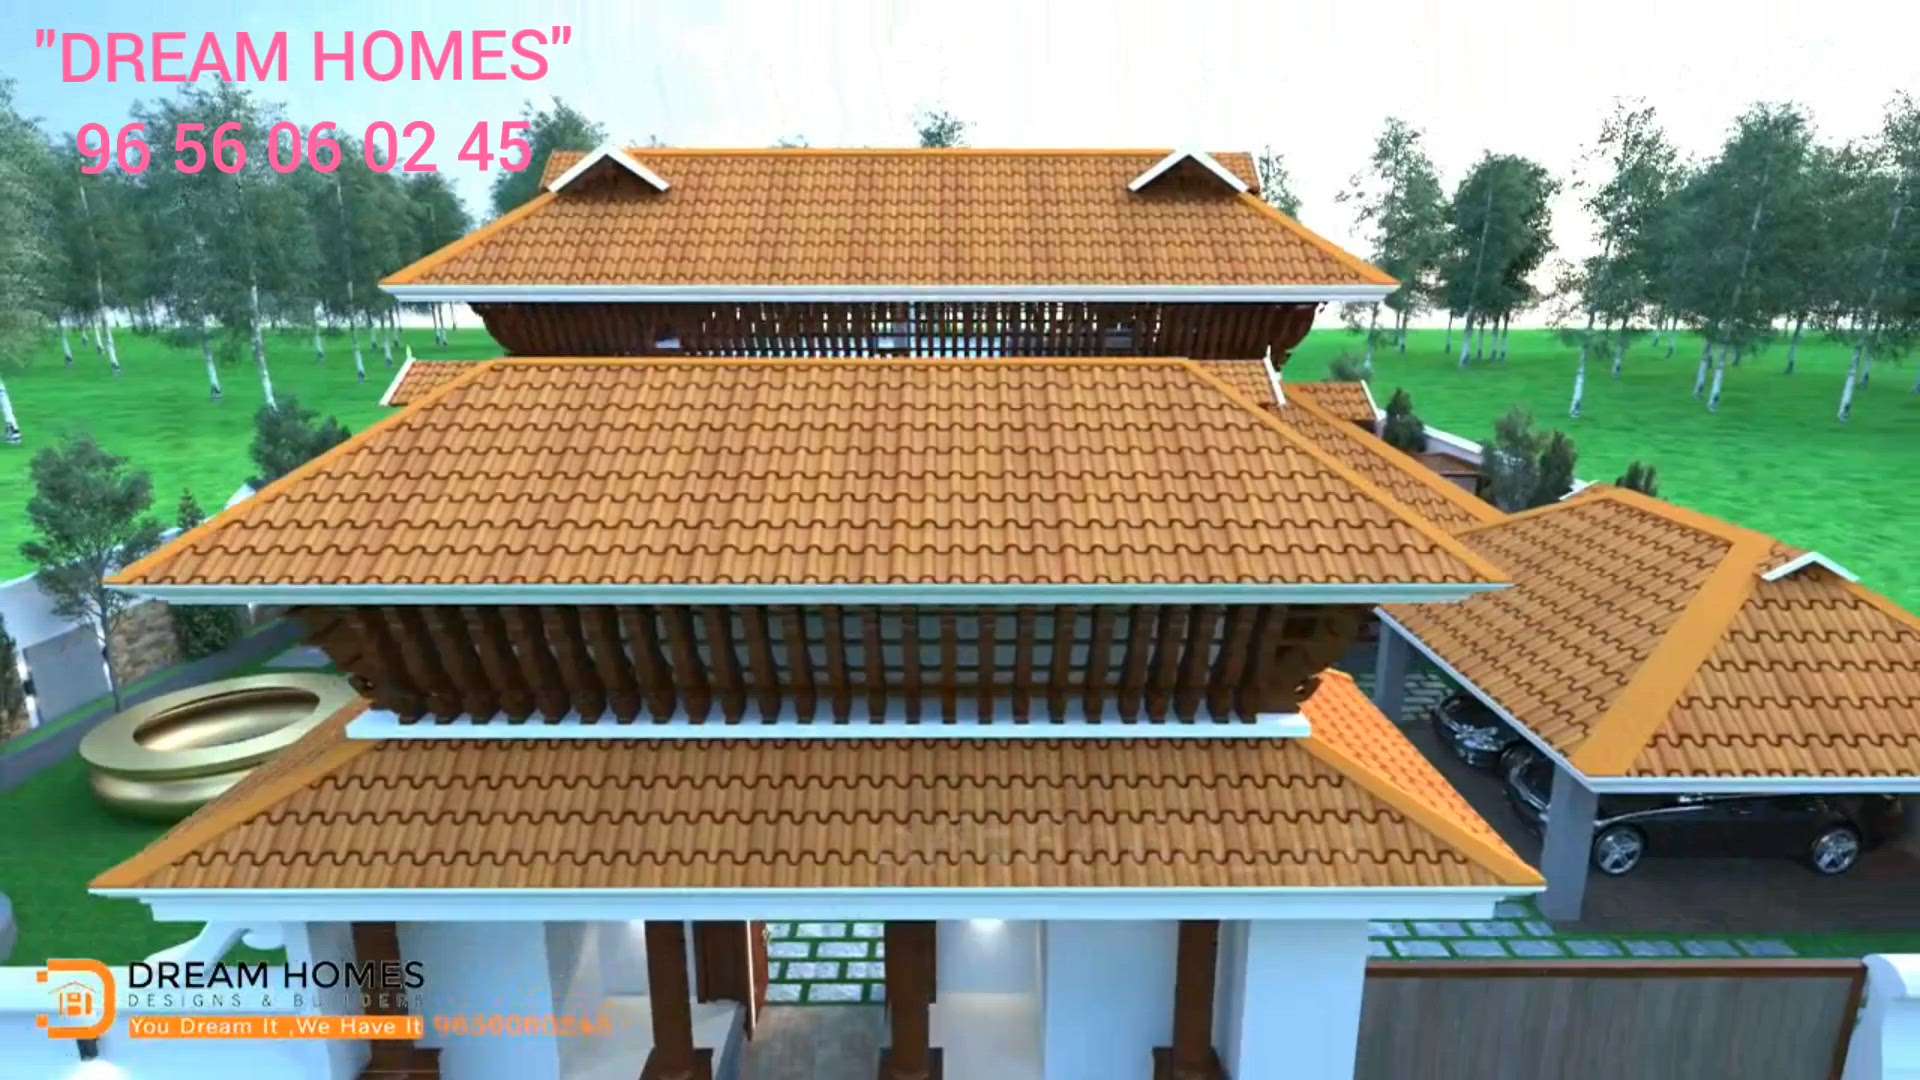 "DREAM HOMES DESIGNS & BUILDERS "
            You Dream It, We Have It'

       "Kerala's No 1 Architect for Traditional Homes"

"A beautiful traditional structure  will be completed only with the presence of a good Architect and pure Vasthu Sastra.

Dream Homes will always be there whenever we are needed.

We are providing service to all over India 
No Compromise on Quality, Sincerity & Efficiency.

#traditionalhome #traditional

For more info

9656060245
7902453187

www.dreamhomesbuilders.com
For more info 
9656060245
7902453187